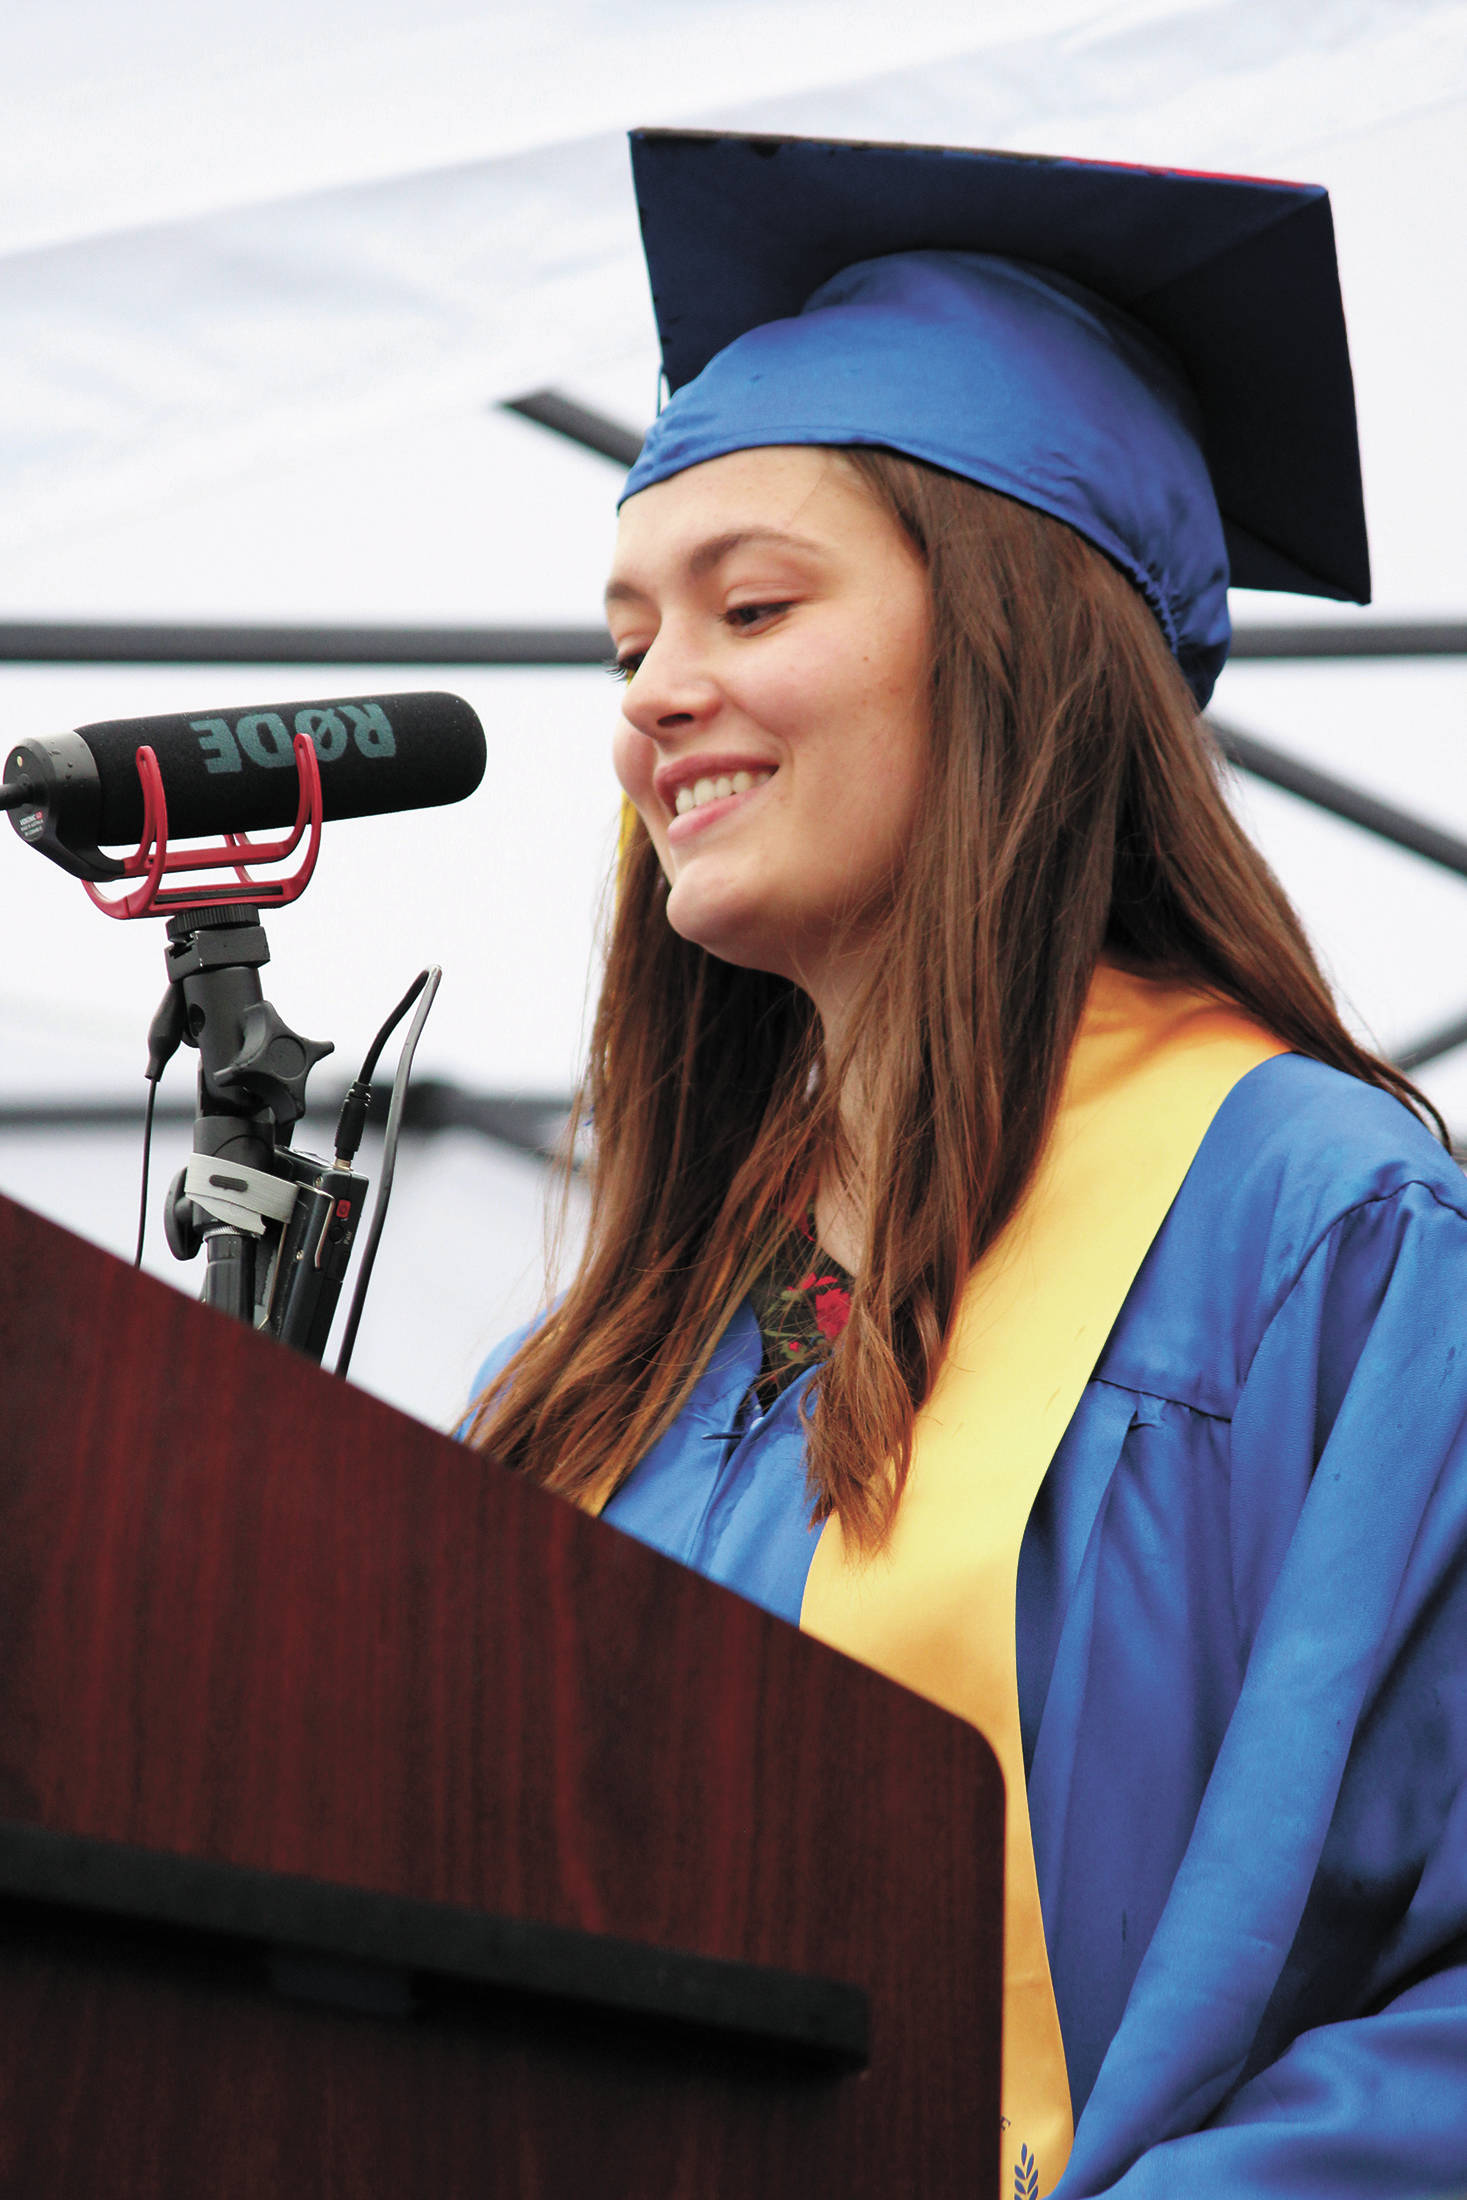 Valedictorian Ruby Allen speaks to her fellow graduates Monday, May 18, 2020 during an alternative commencement ceremony held in front of Homer High School in Homer, Alaska. (Photo by Megan Pacer/Homer News)